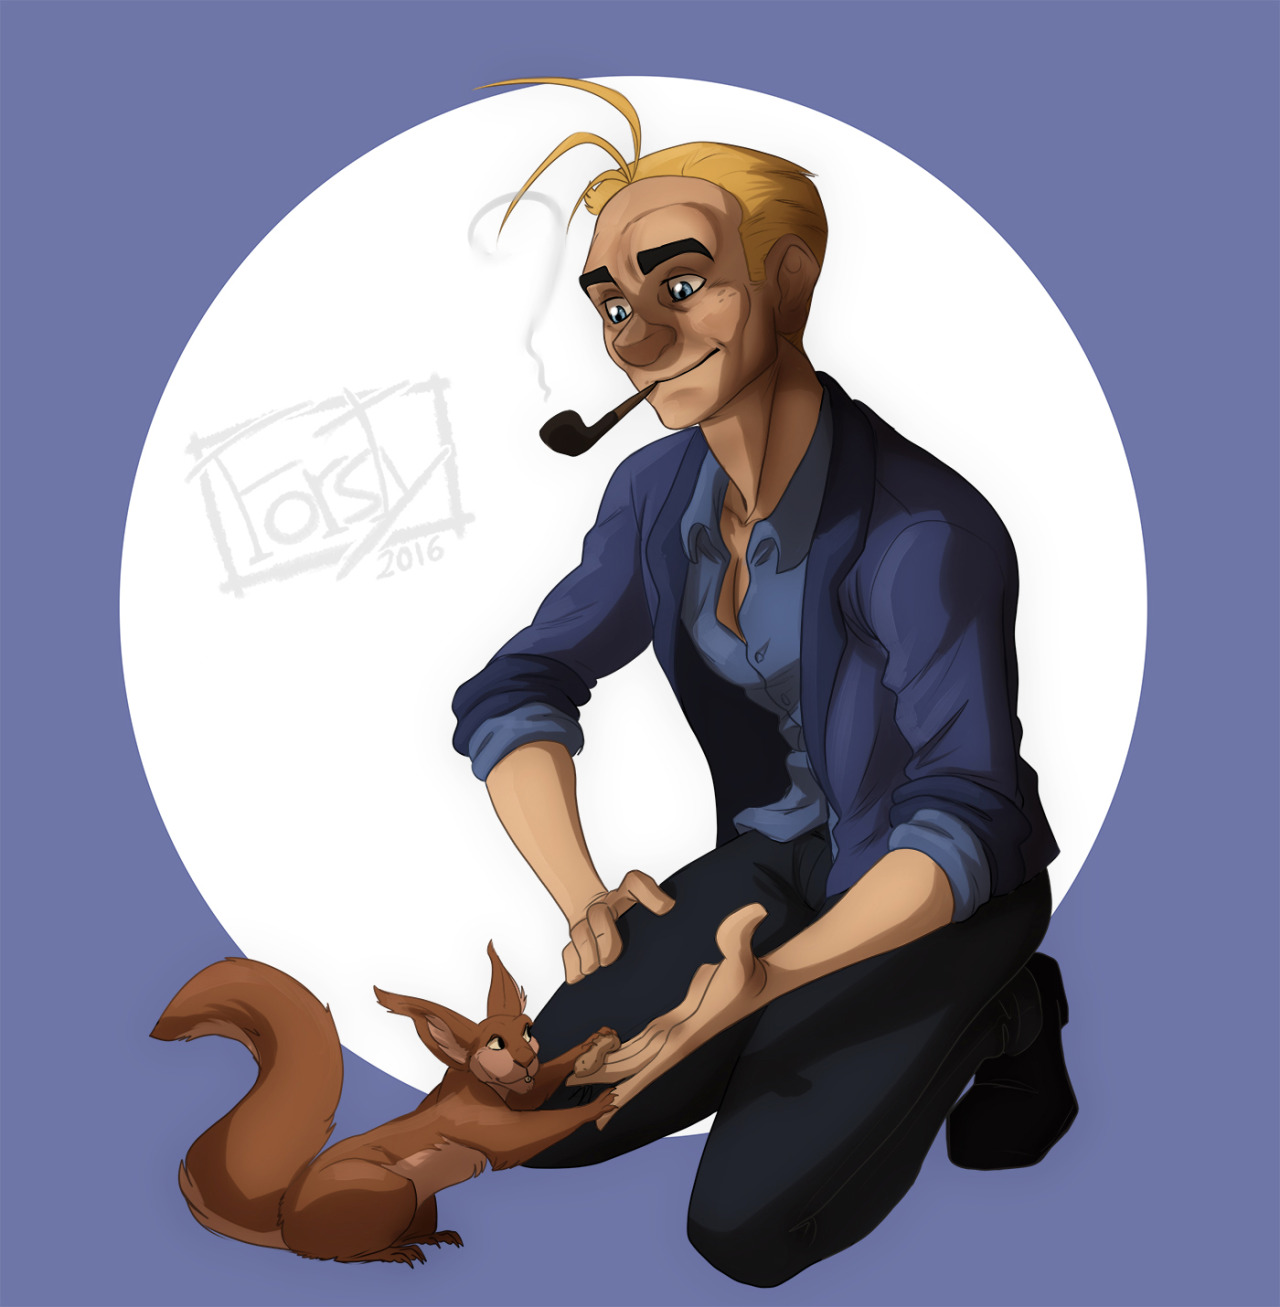 Fantasio and Spip (ill. Didrik "Forsty"; Copyright (c) 2016 by the artist; Spirou (c) Dupuis; image from forsty-art.tumblr.com)